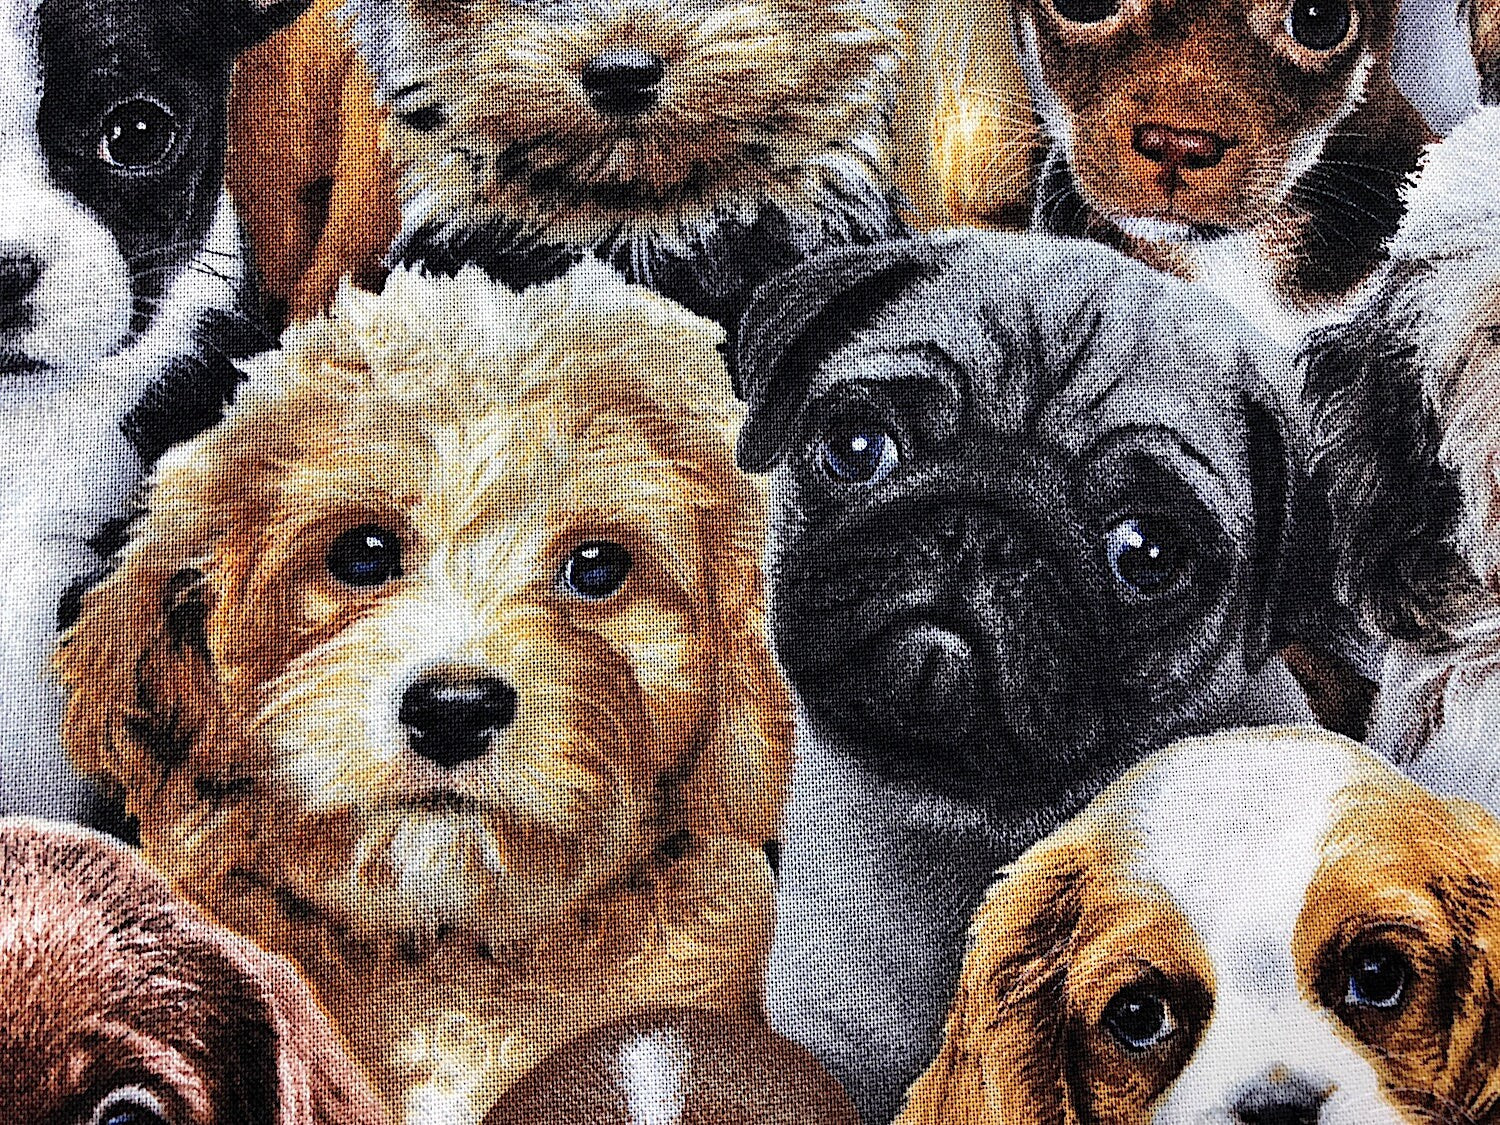 Several colors and breeds of dogs cover this fabric.